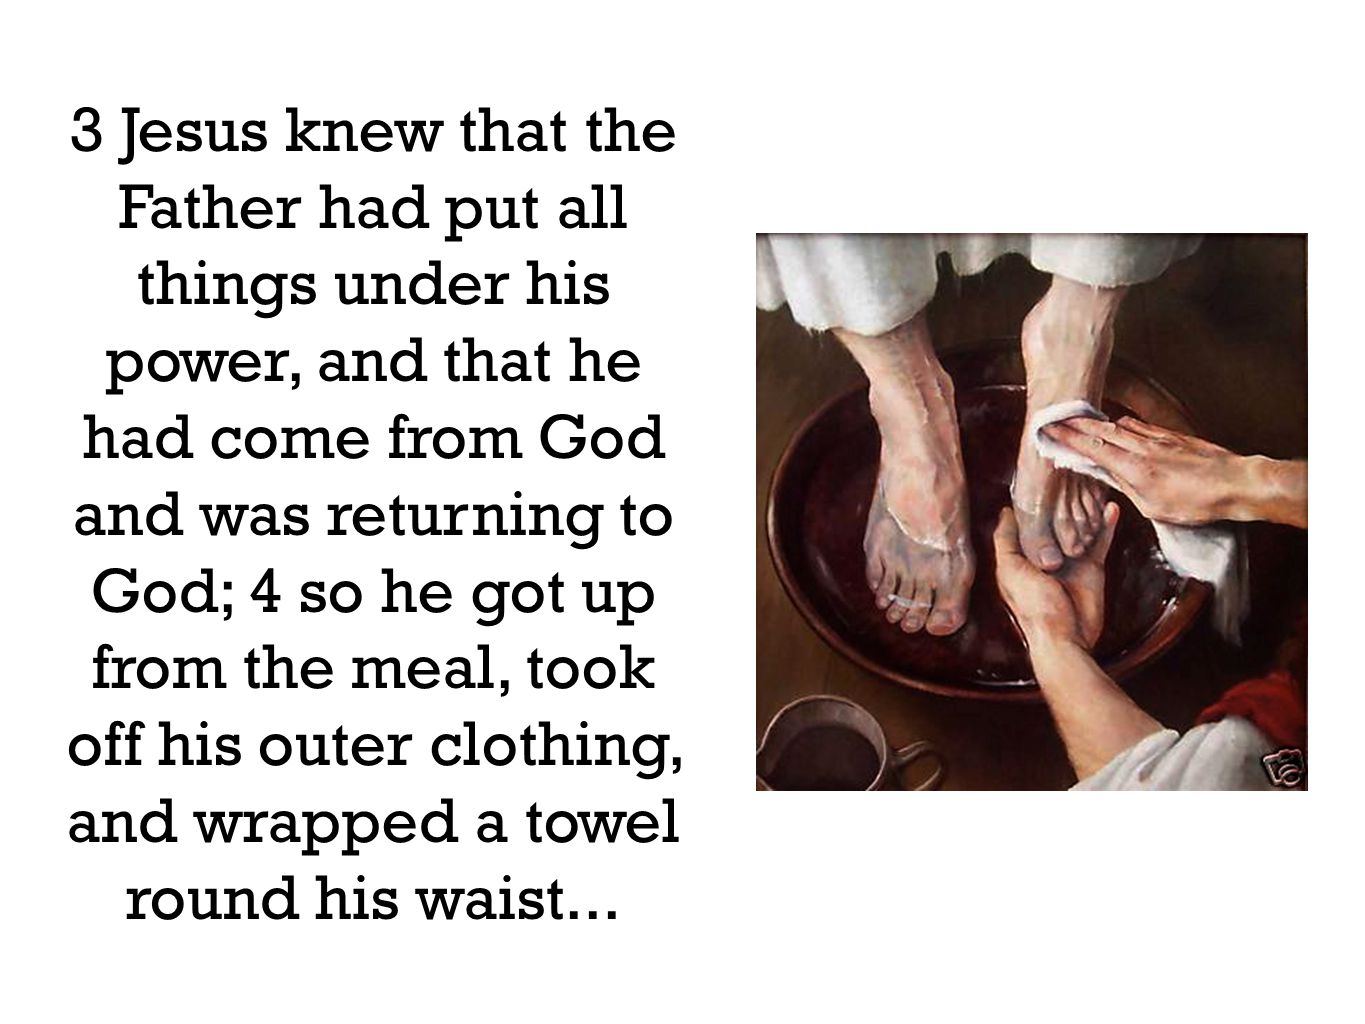 3 Jesus knew that the Father had put all things under his power, and that he had come from God and was returning to God; 4 so he got up from the meal, took off his outer clothing, and wrapped a towel round his waist...